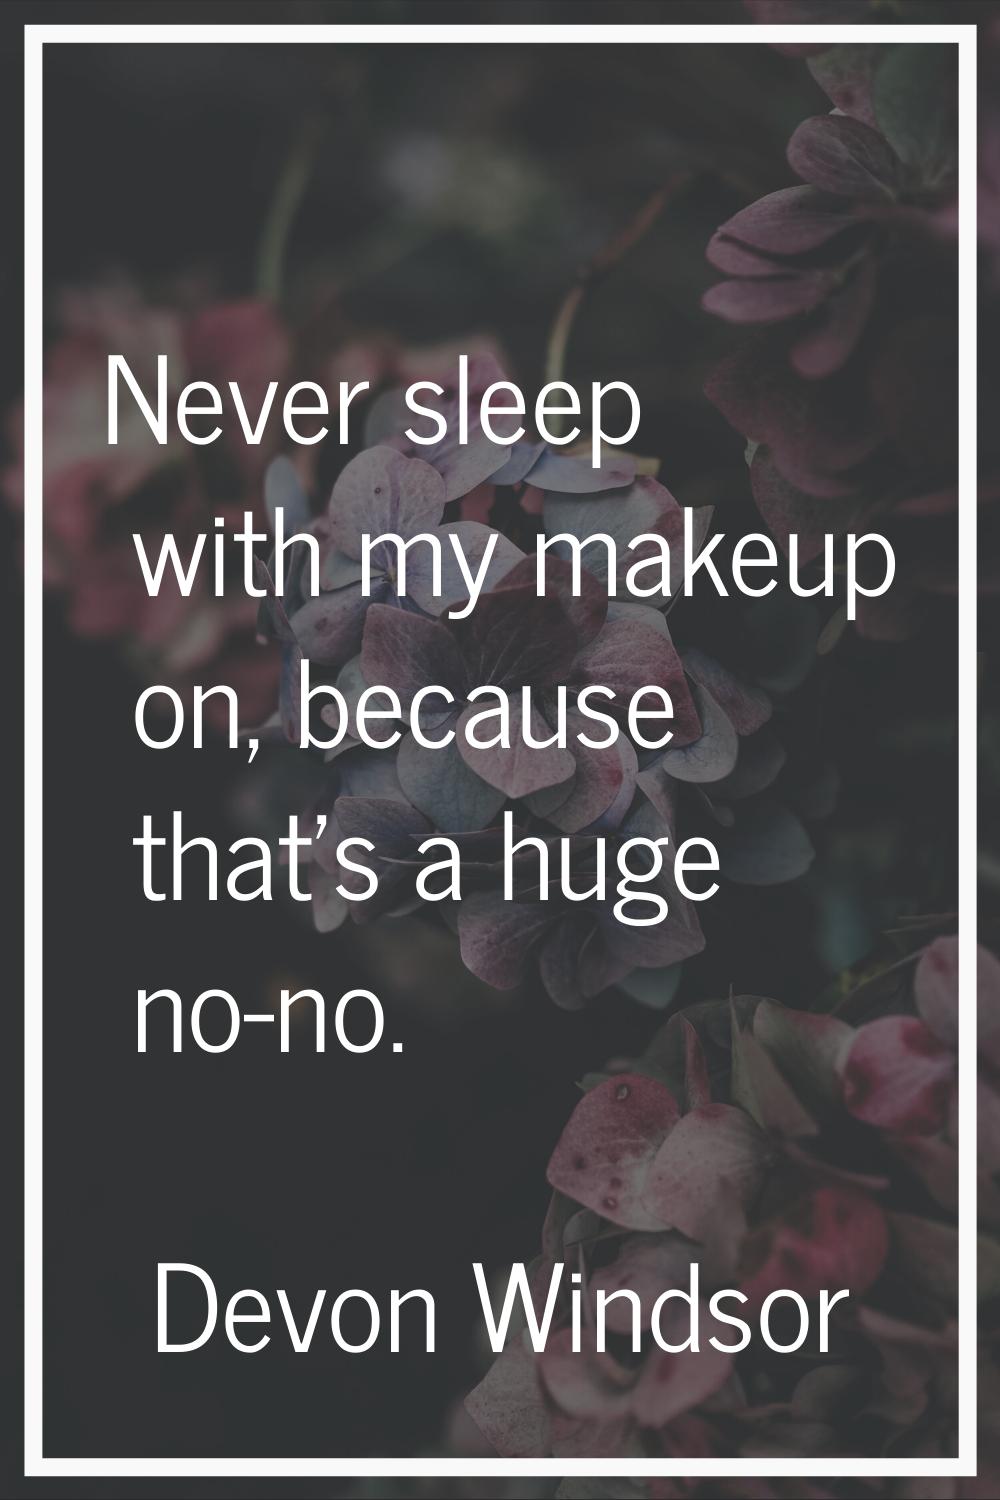 Never sleep with my makeup on, because that's a huge no-no.